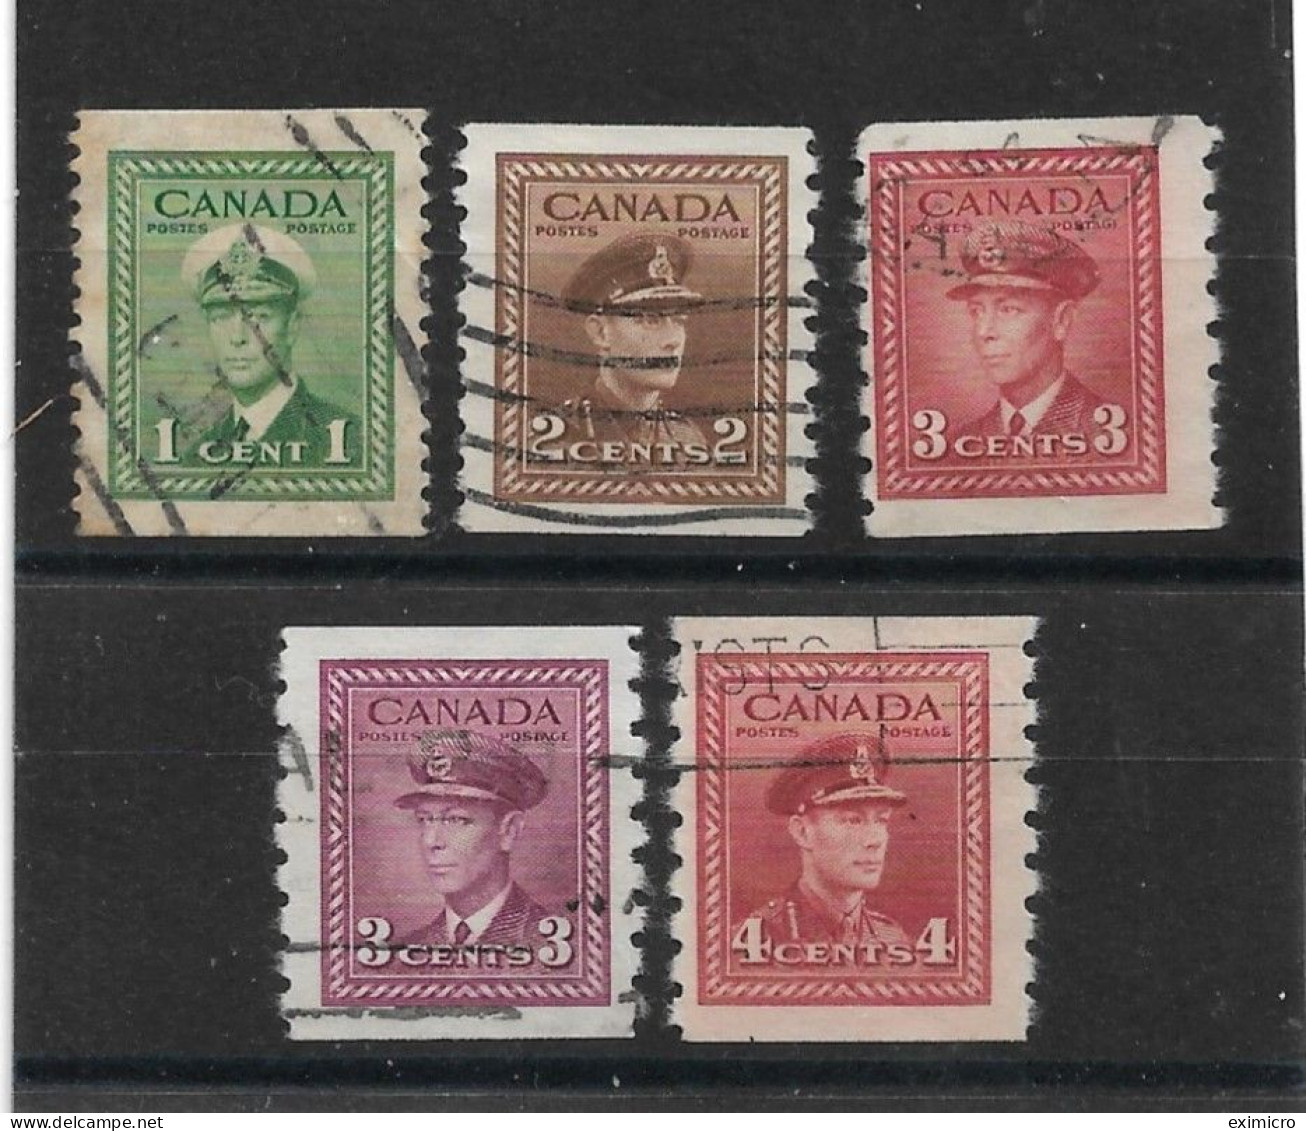 CANADA 1942 - 1943 COIL STAMPS SET IMPERF X PERF 8 SG 389/393 FINE USED Cat £26 - Used Stamps